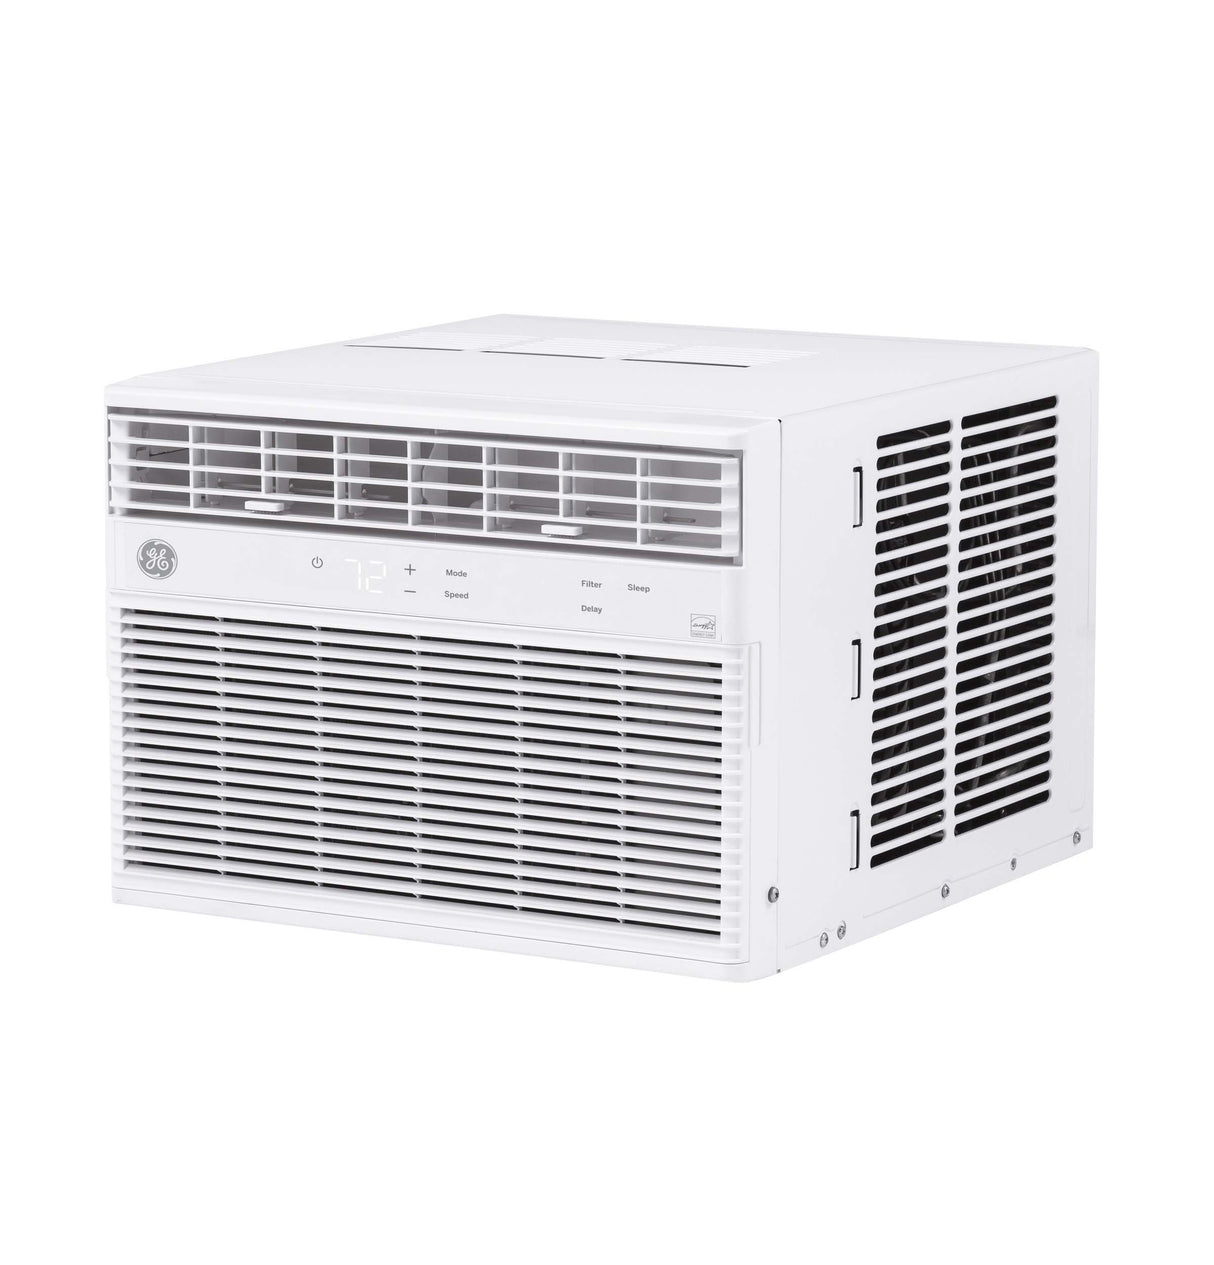 GE(R) 23,500 BTU Heat/Cool Electronic Window Air Conditioner for Extra-Large Rooms up to 1,500 sq. ft. - (AHE24DZ)